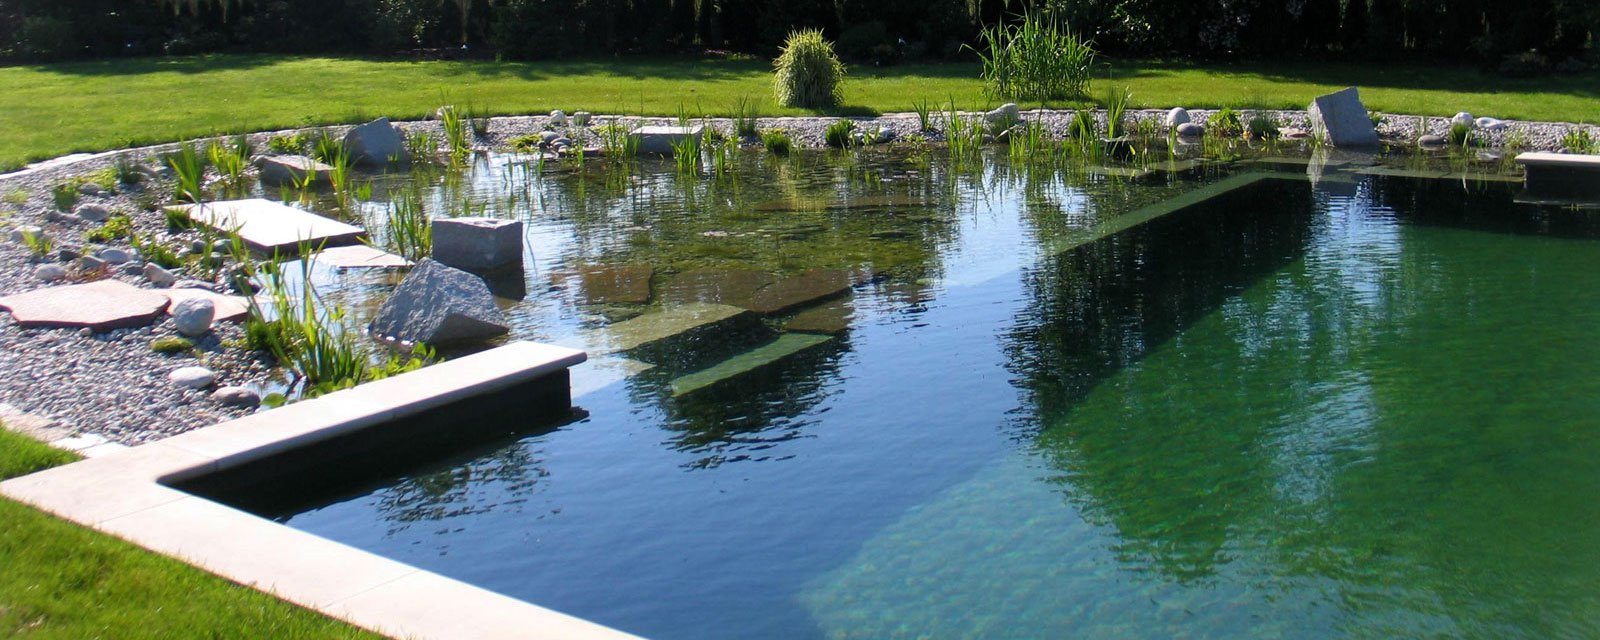 How to maintain a warm natural swimming pool?